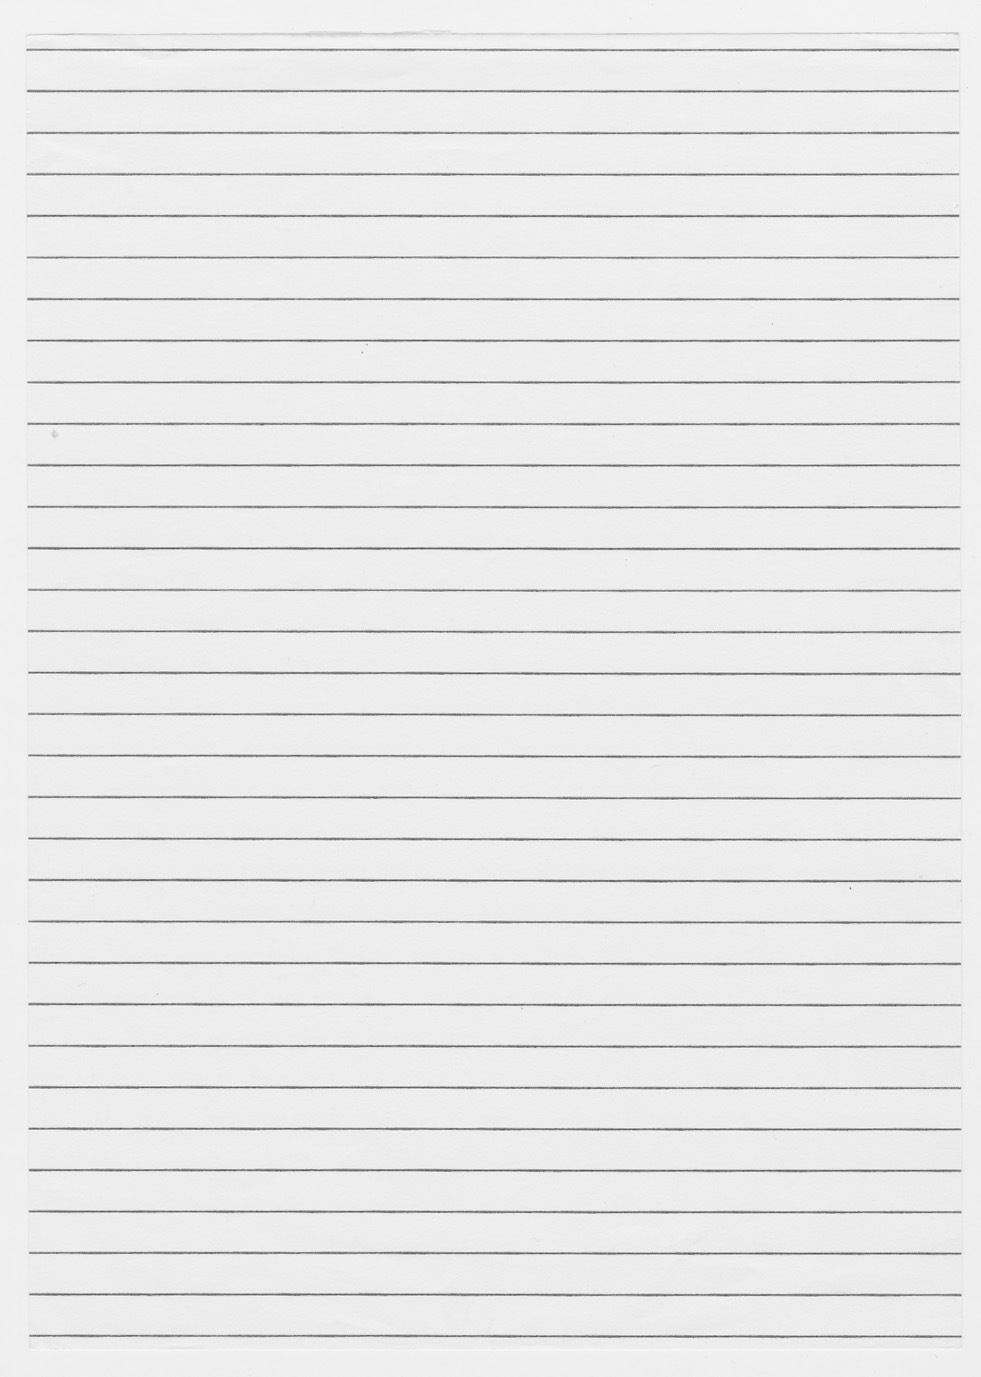 7-best-images-of-black-college-lined-paper-printable-free-printable